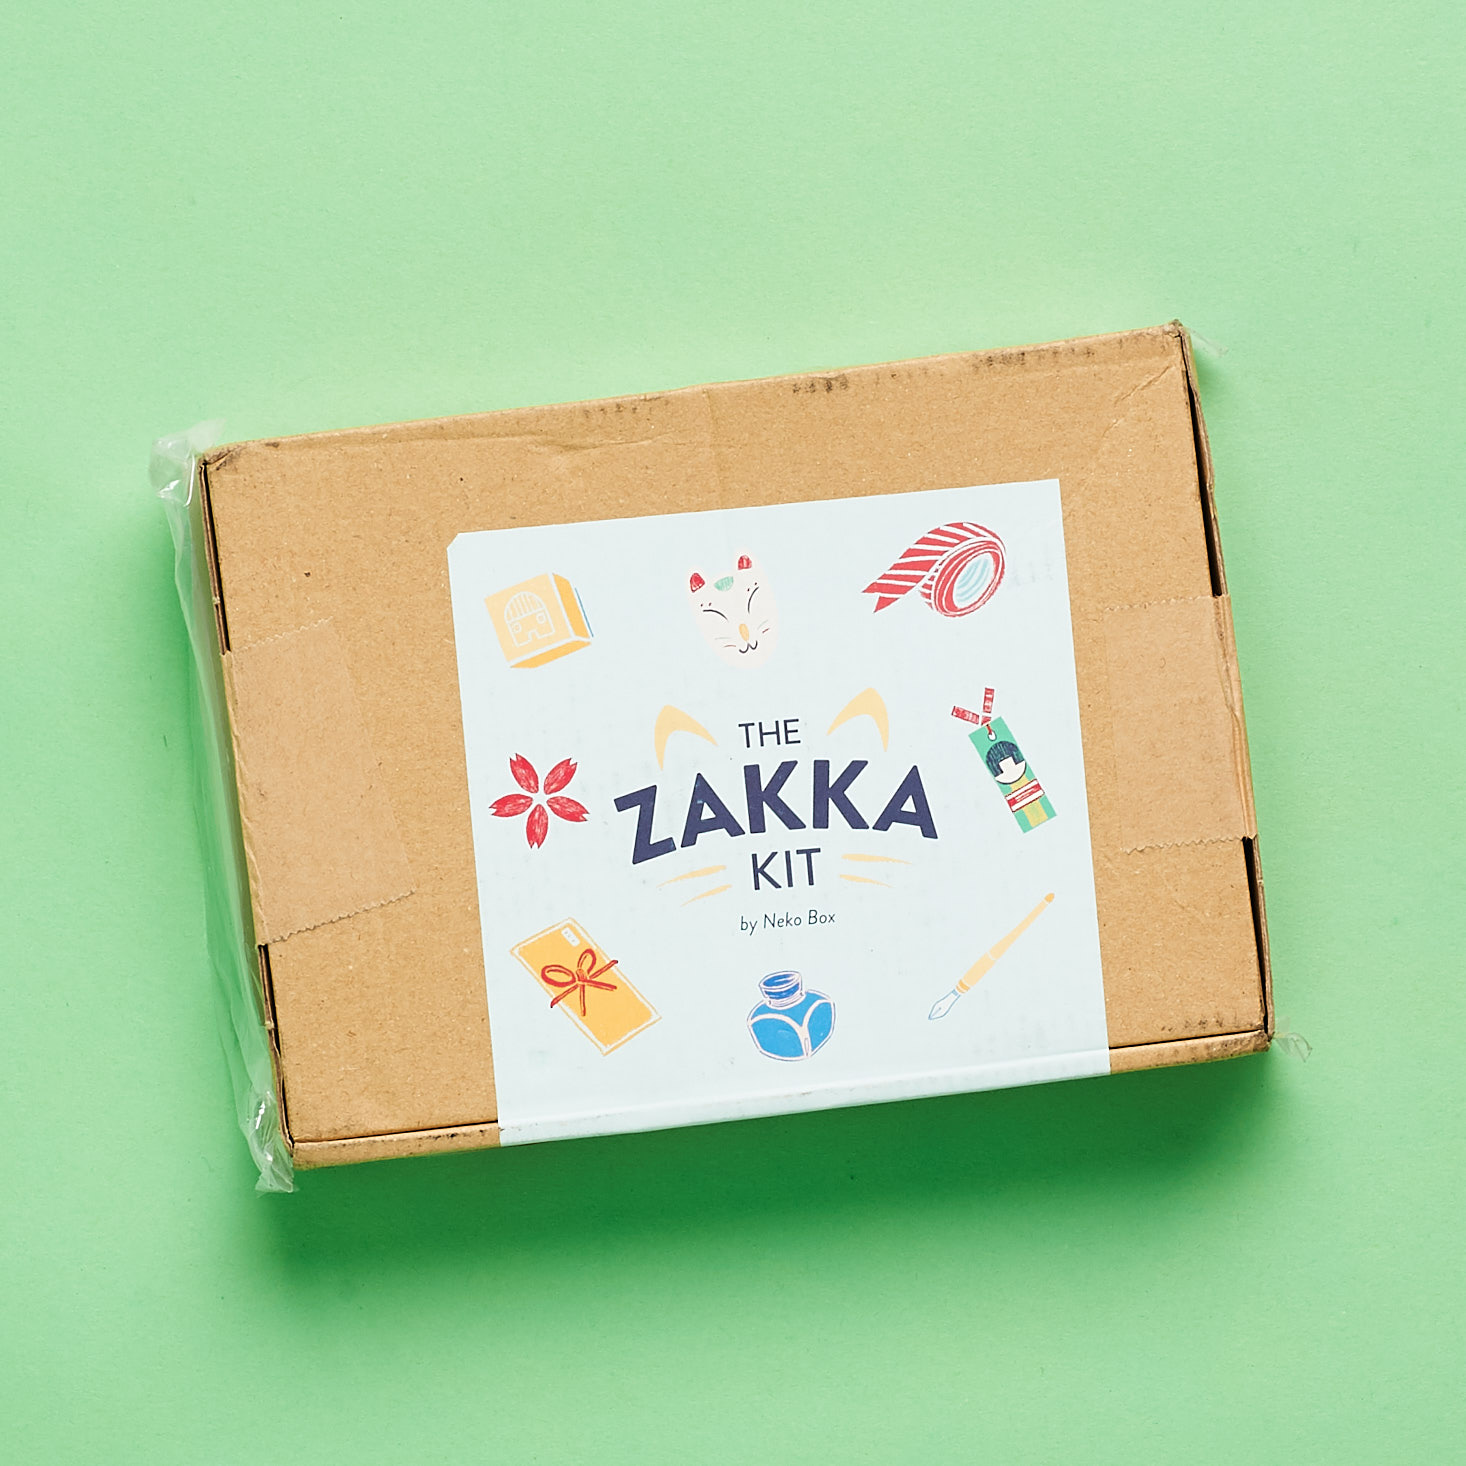 The Zakka Kit Stationery Review + Coupon – June 2019